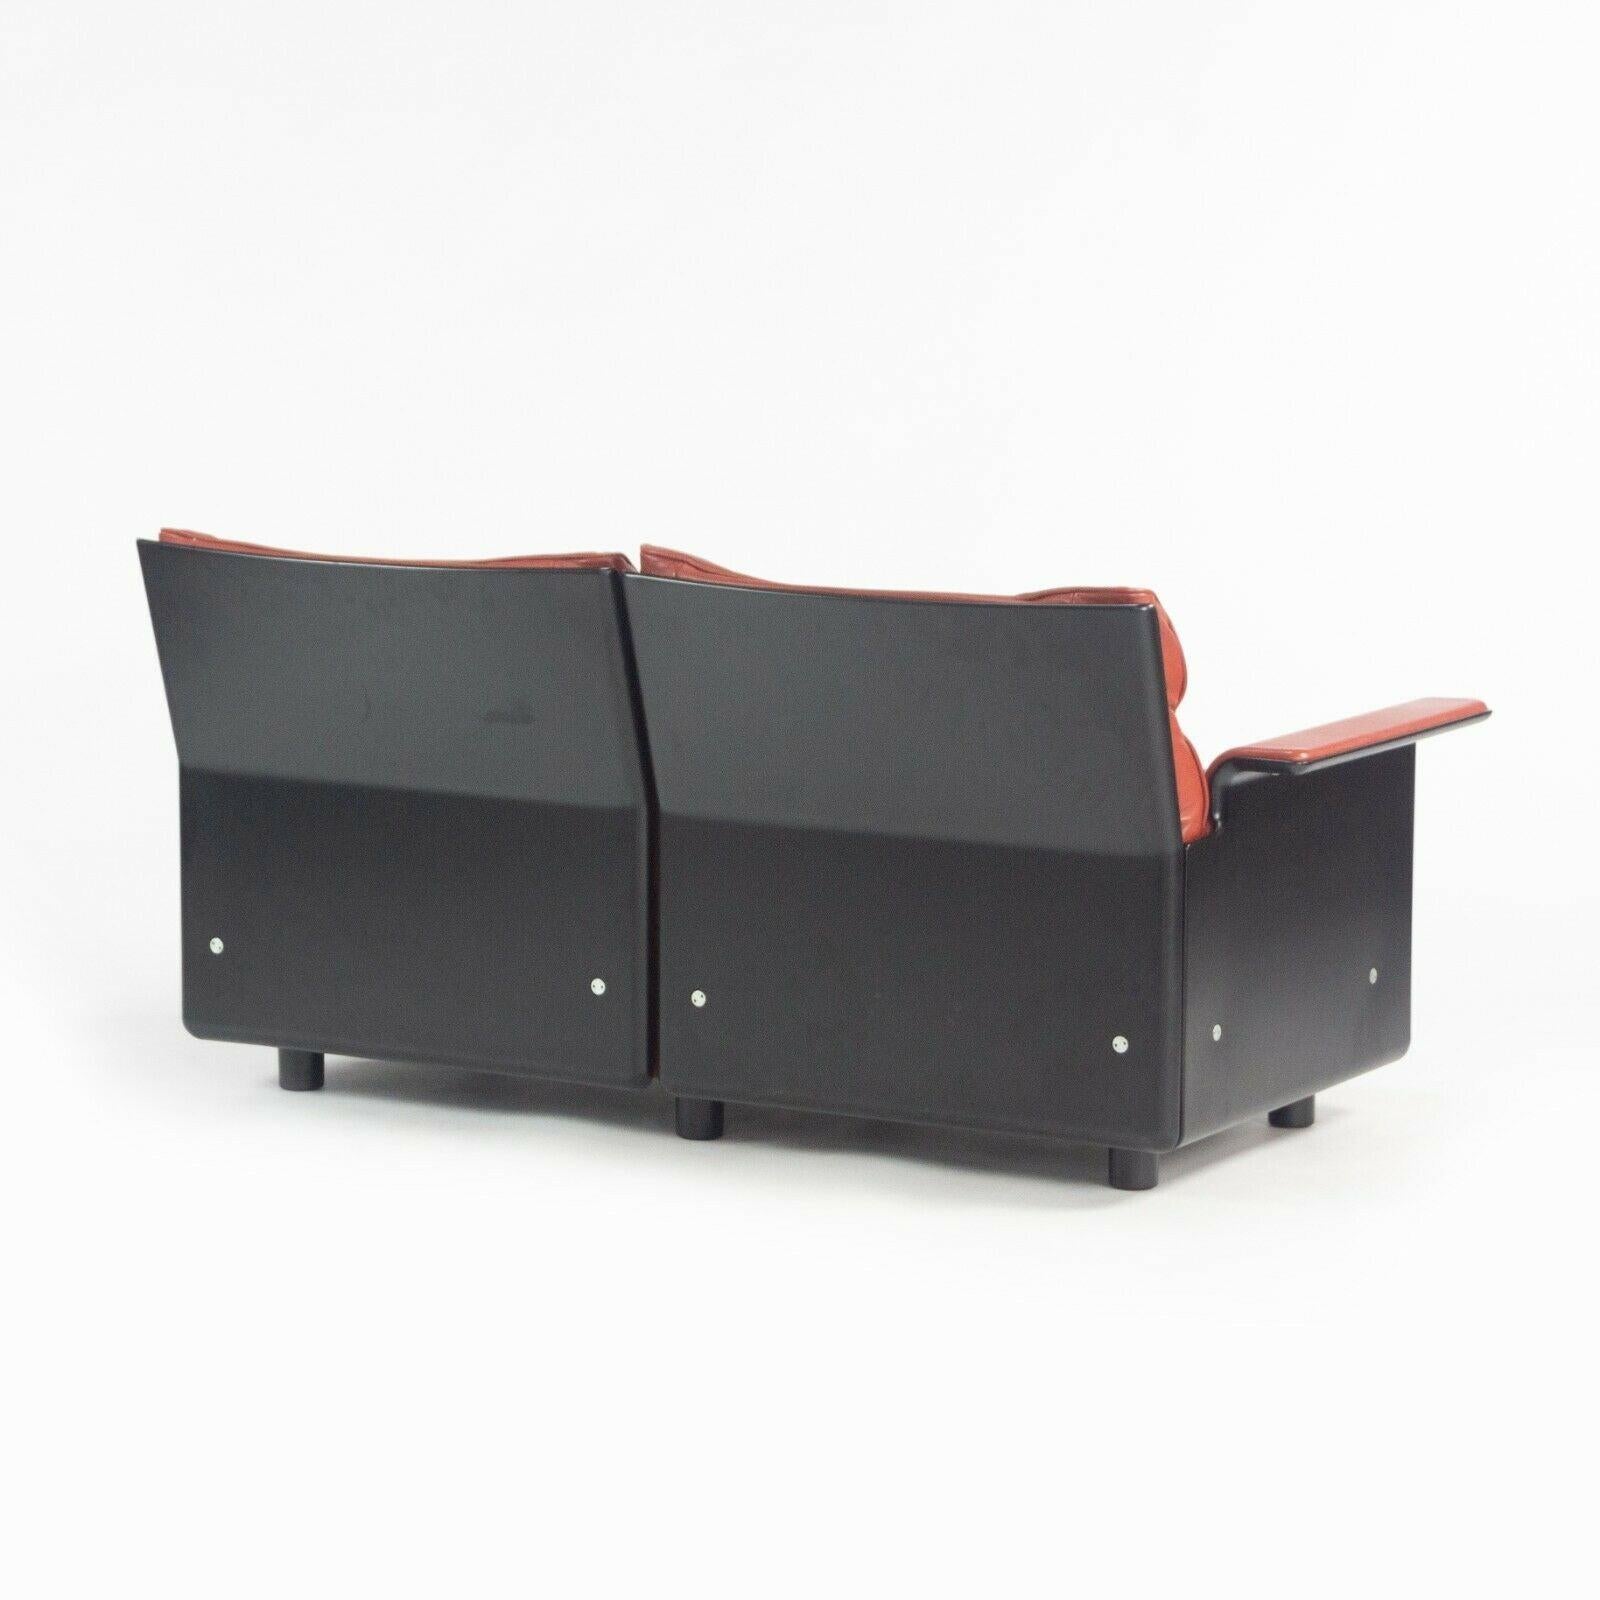 Late 20th Century 1980s Vintage Dieter Rams for Vitsoe 620 Red Leather and Black Two Seat Settee For Sale